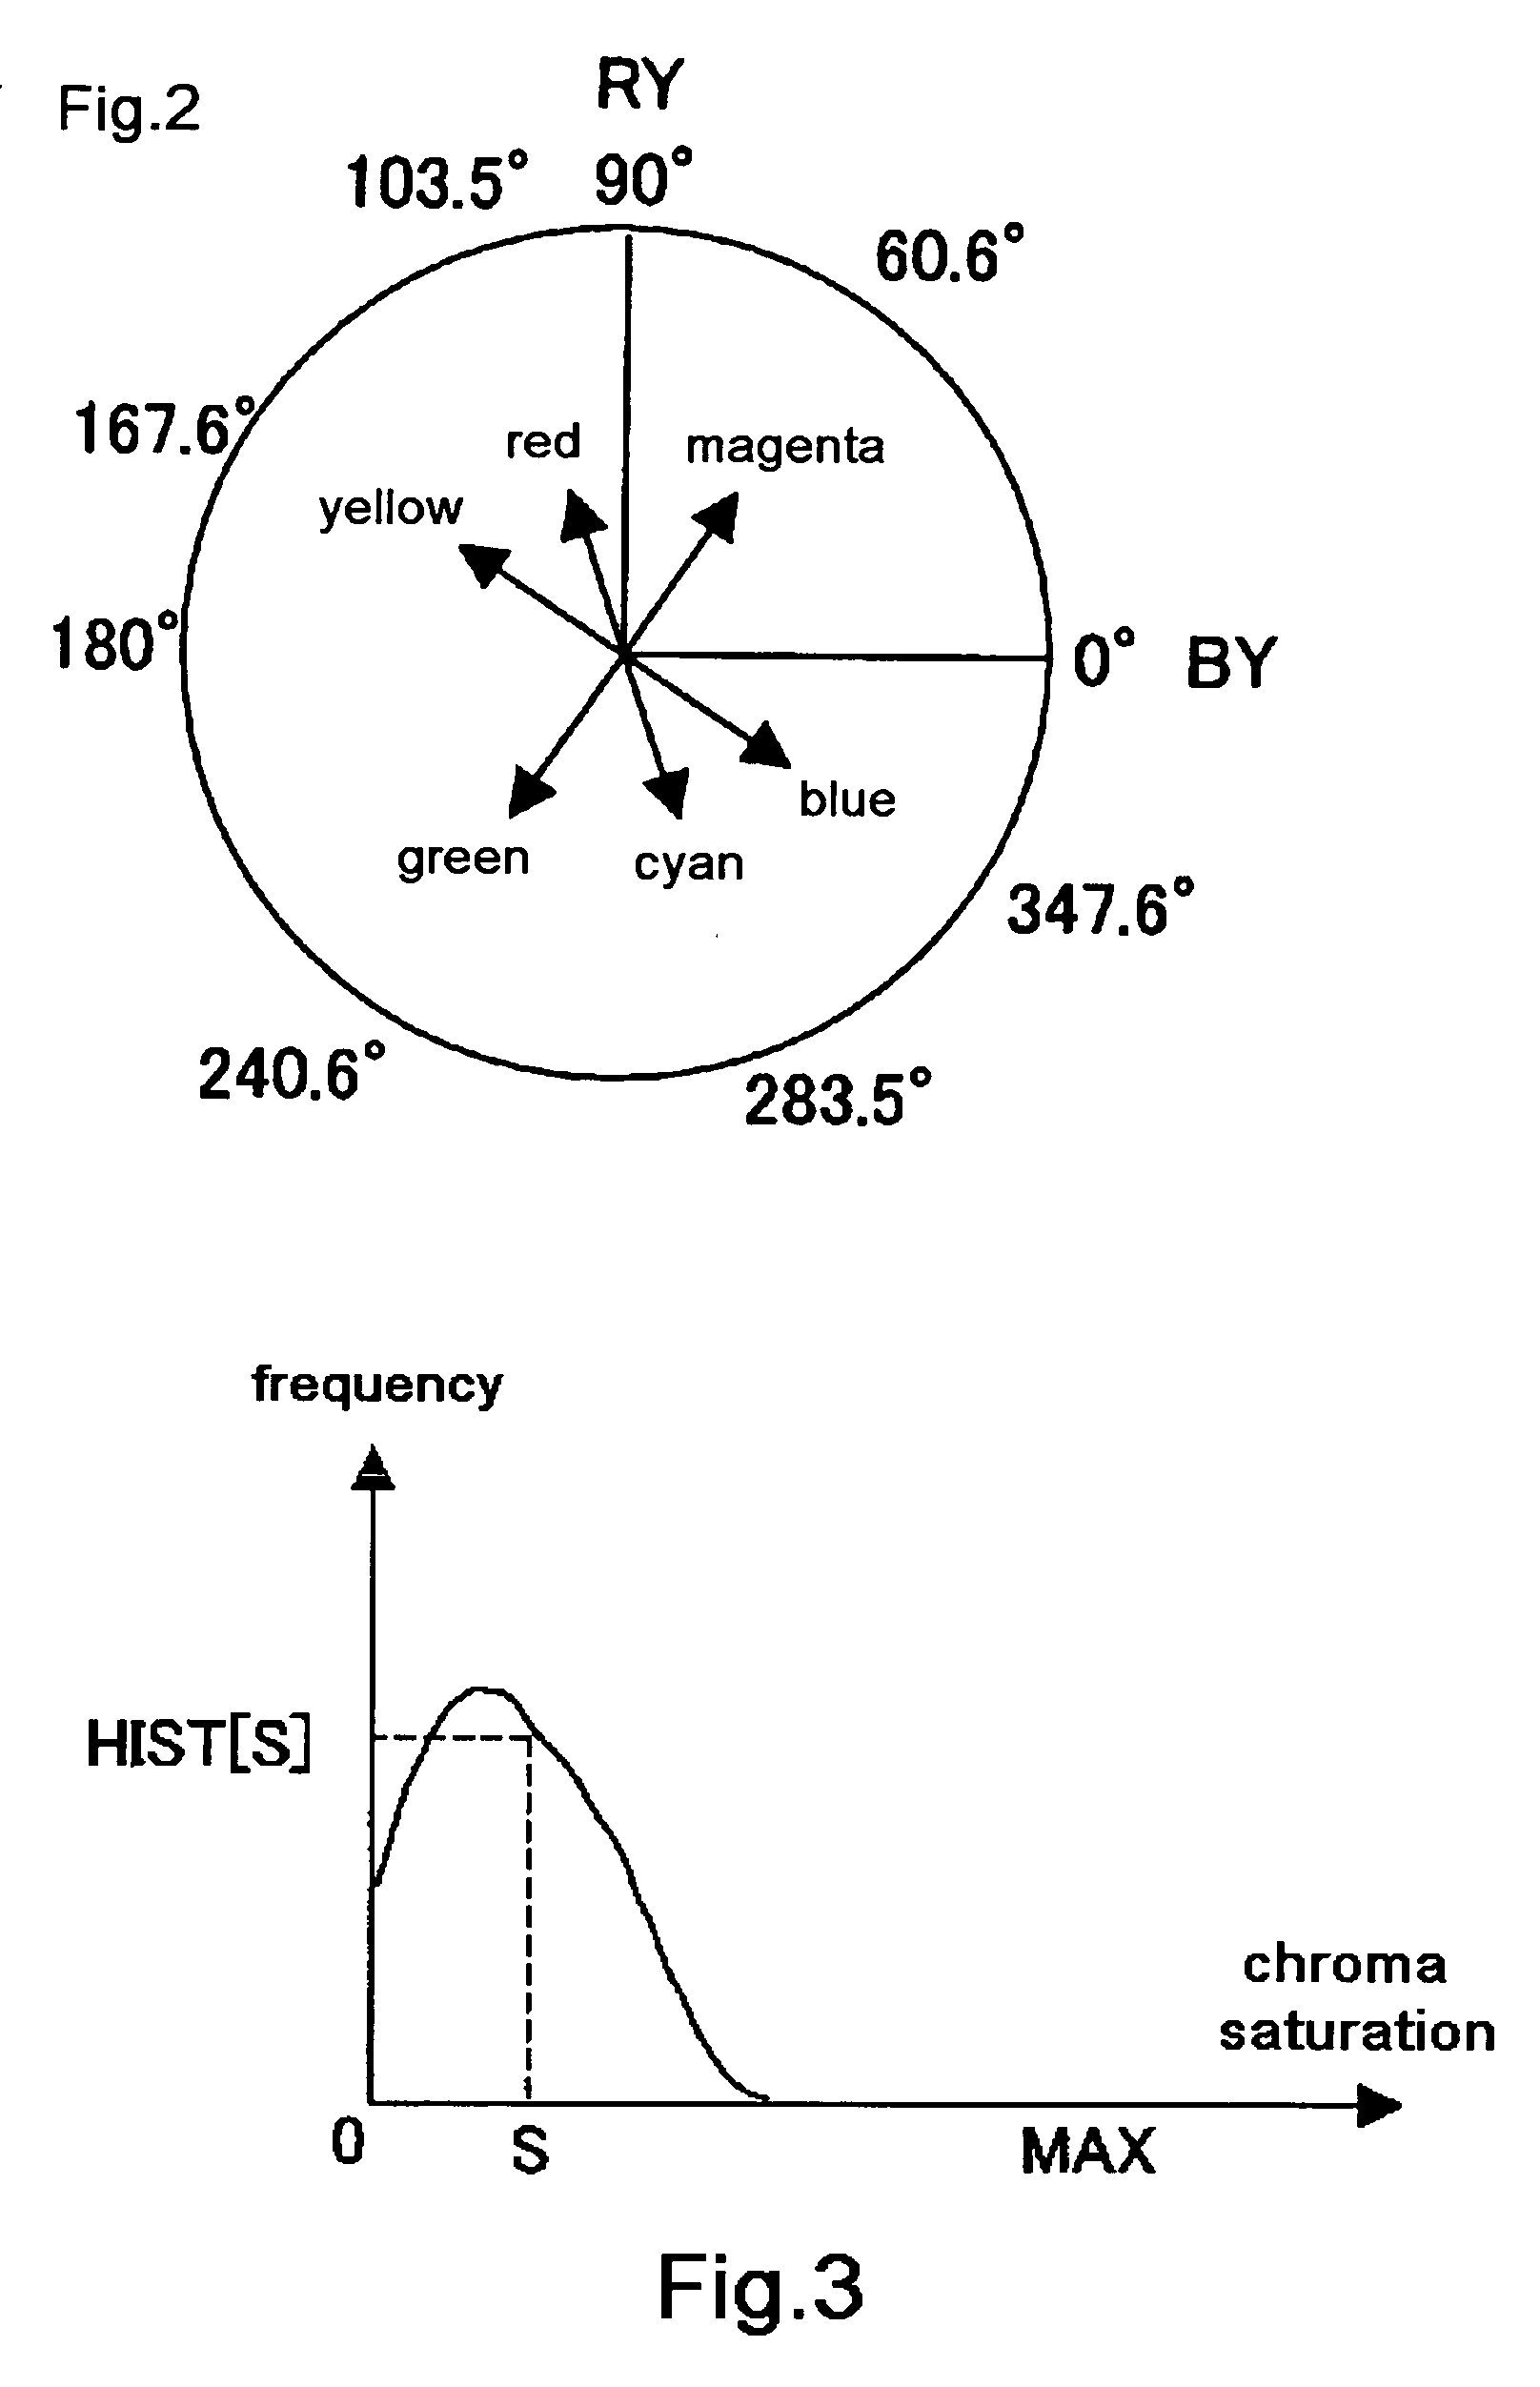 Image processing apparatus and an image processing program